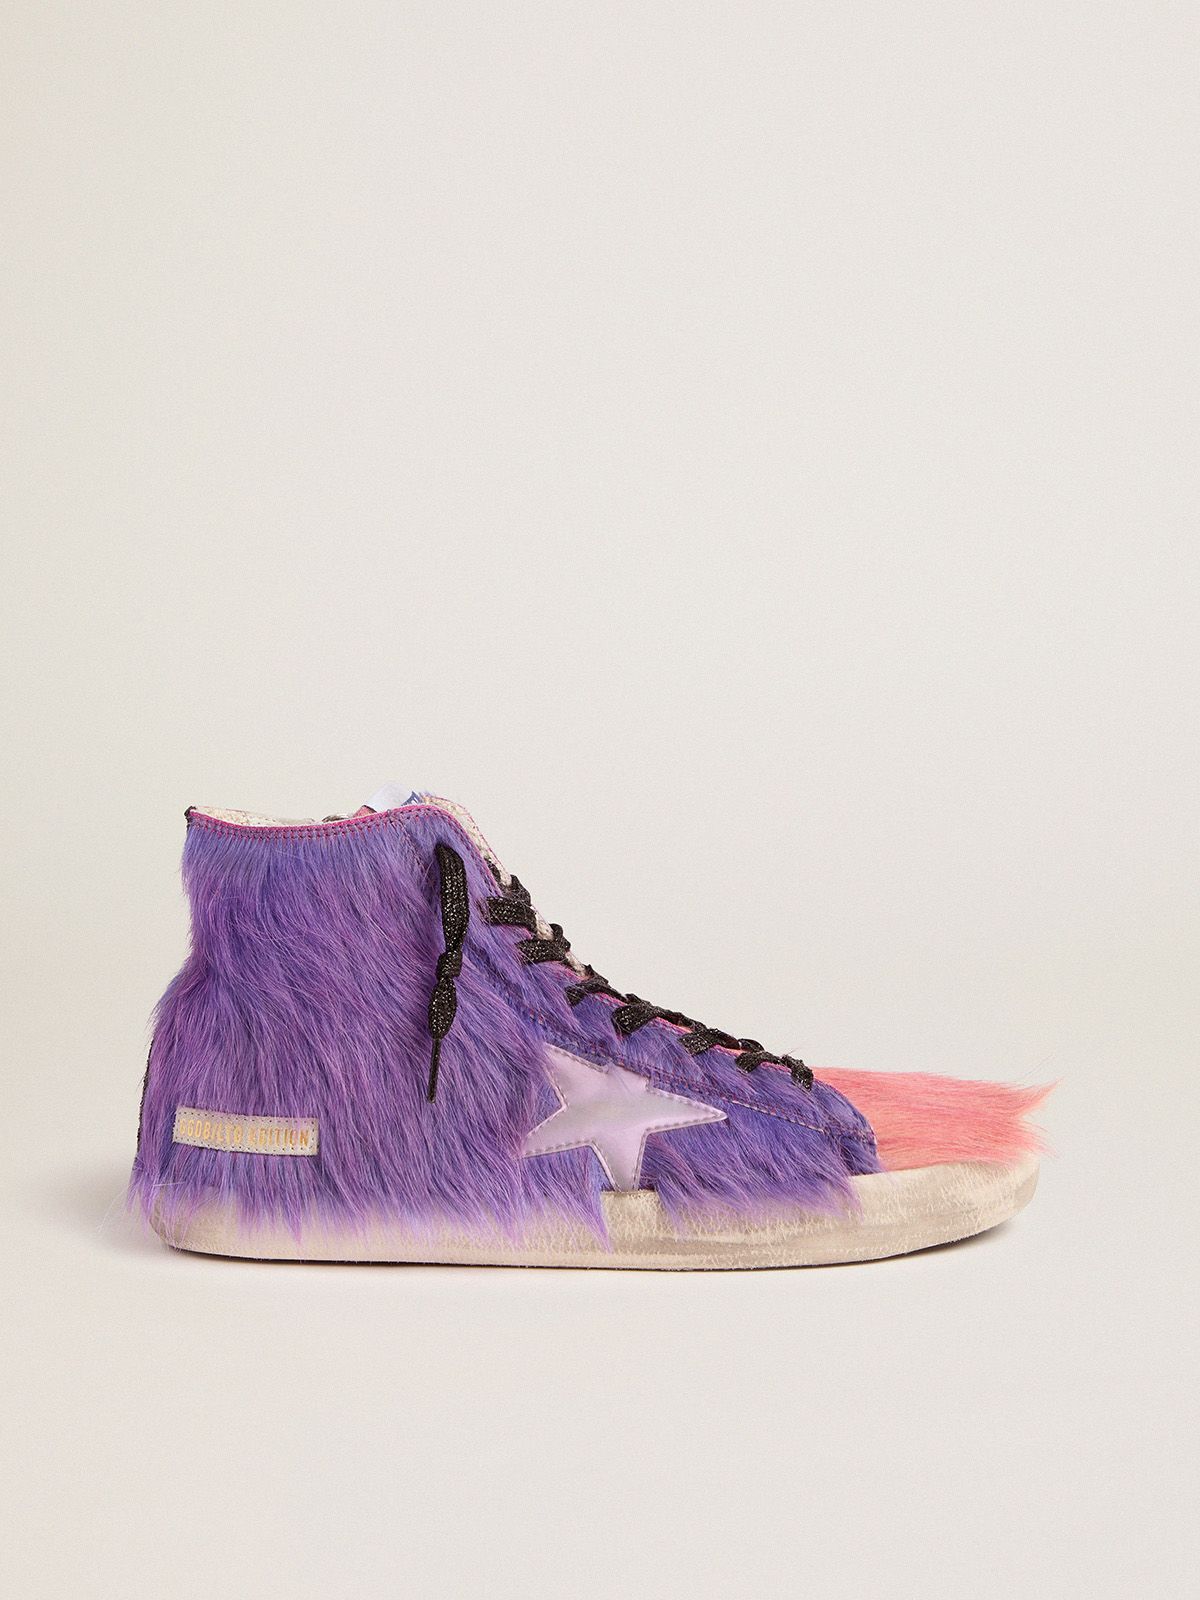 Men’s Limited Edition lilac and pink pony skin Francy sneakers